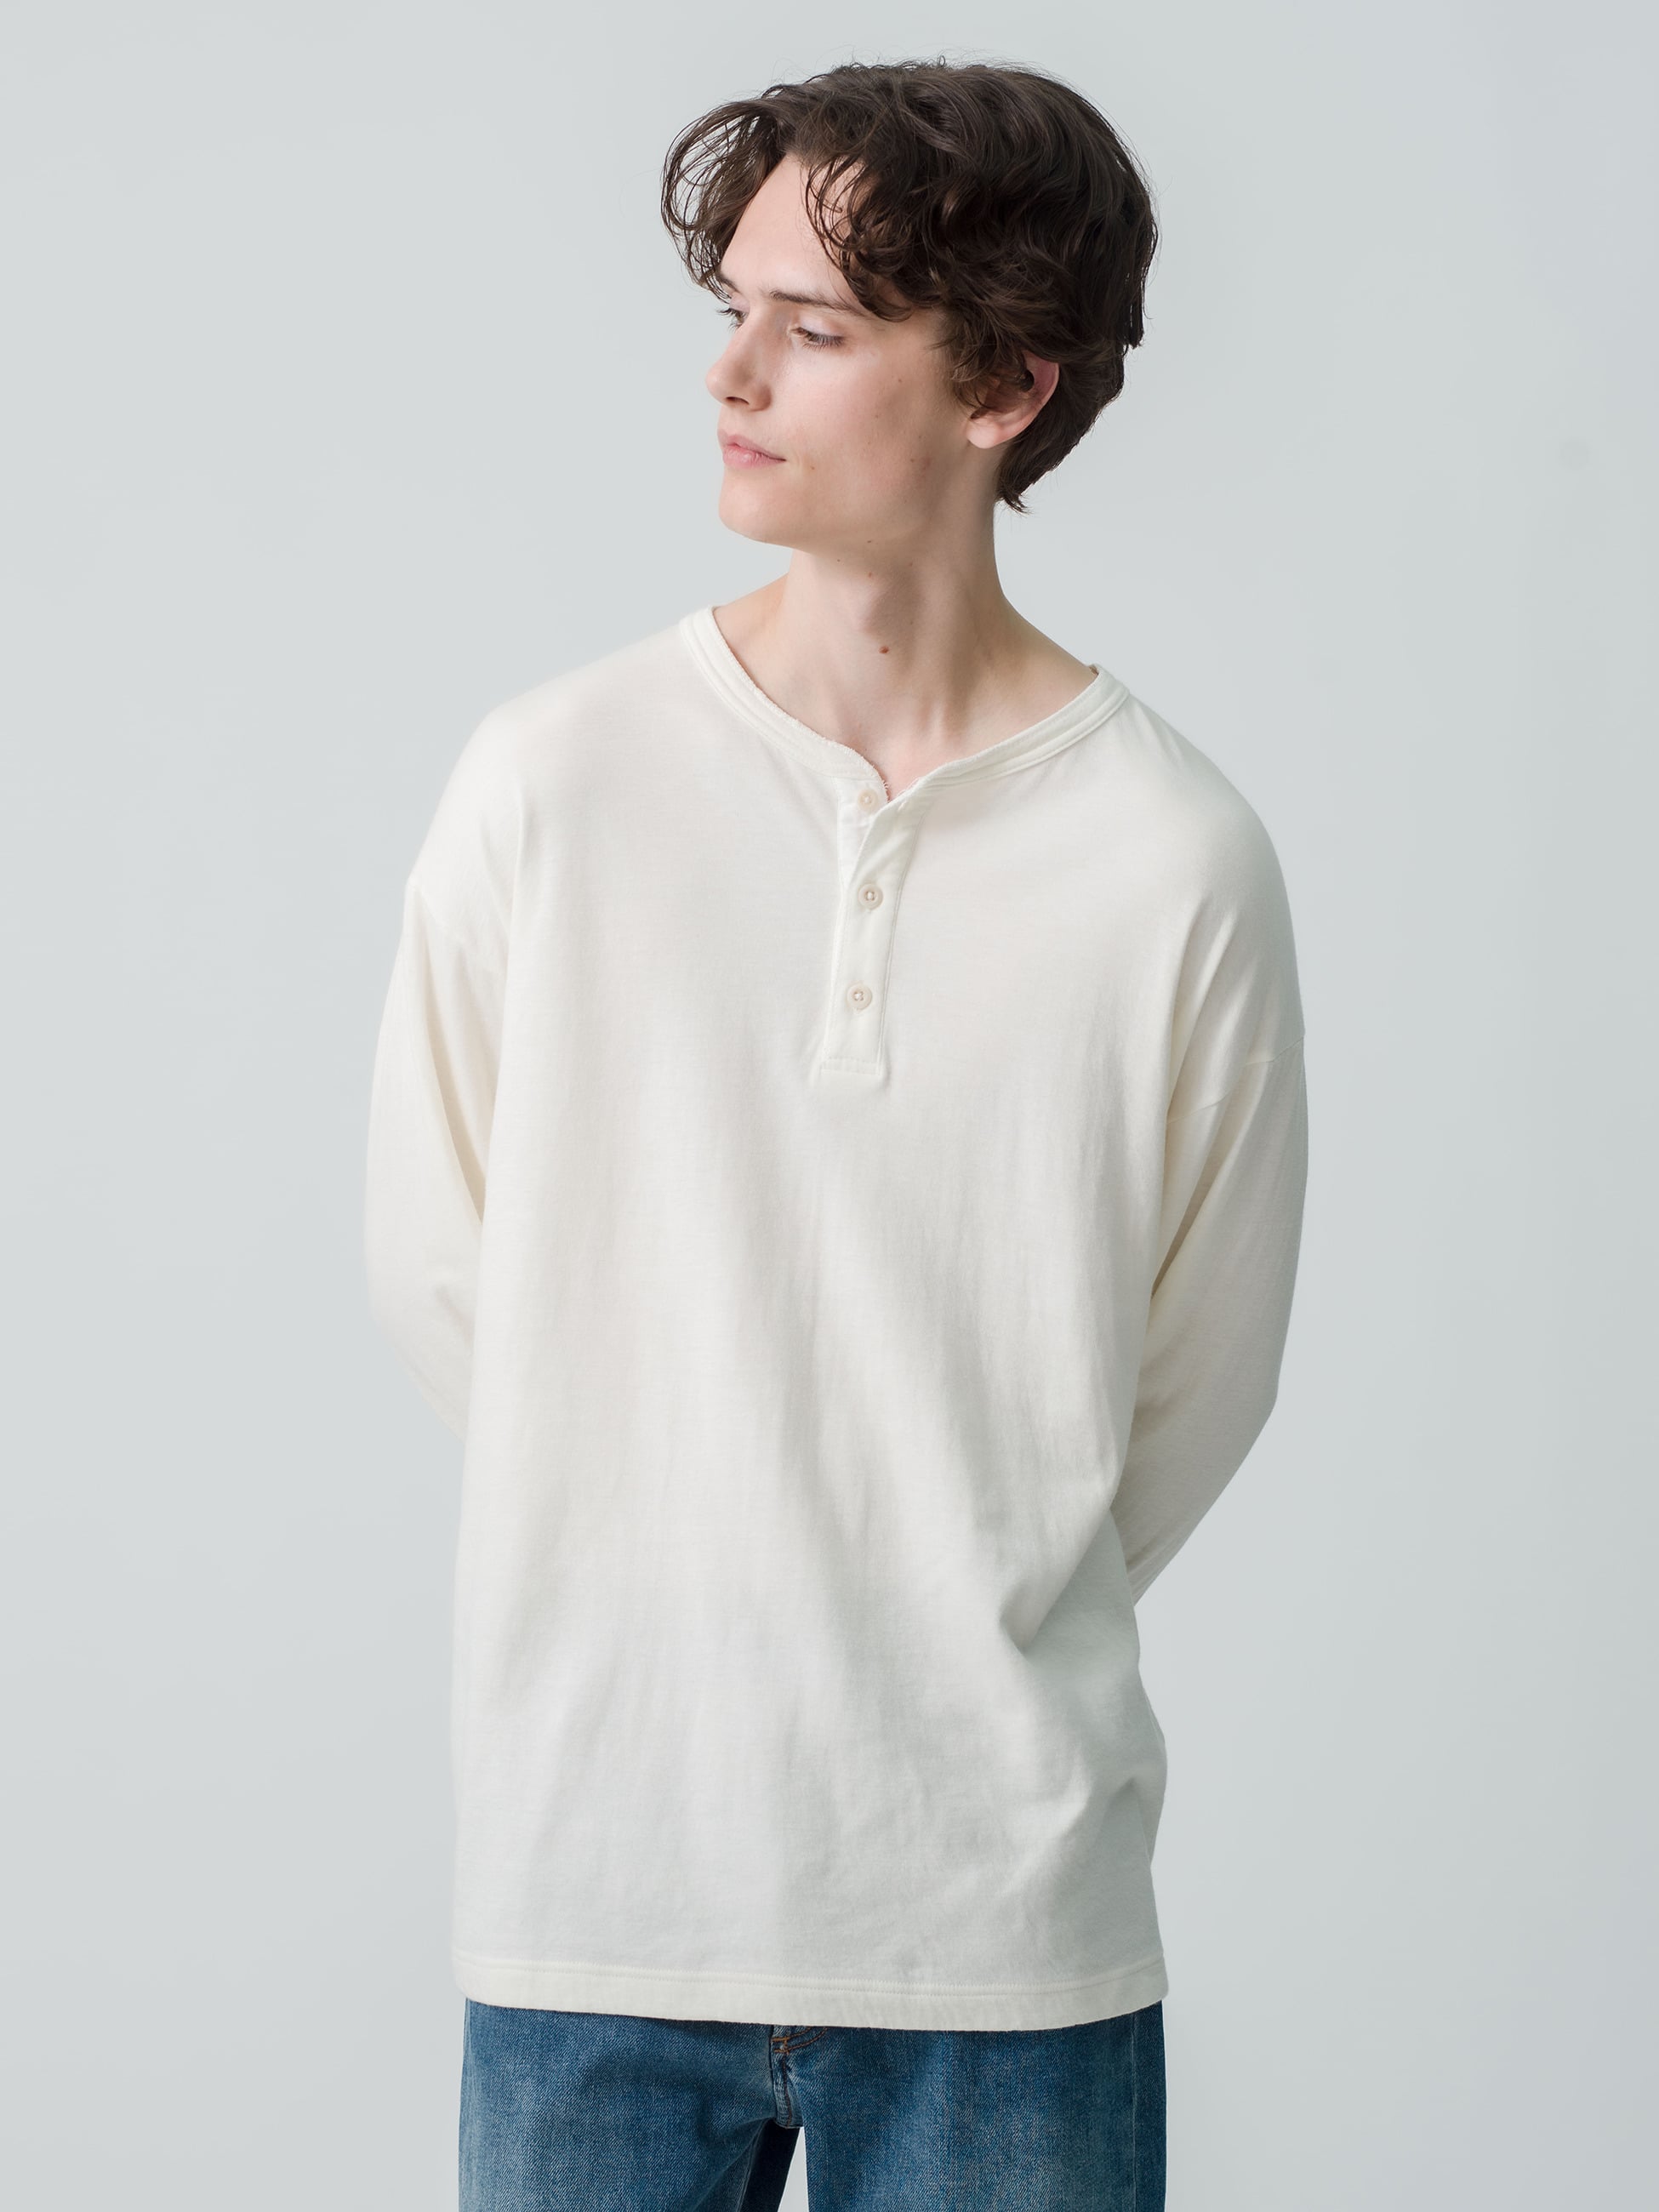 Cotton Cashmere Double Cloth Henly Neck Pullover